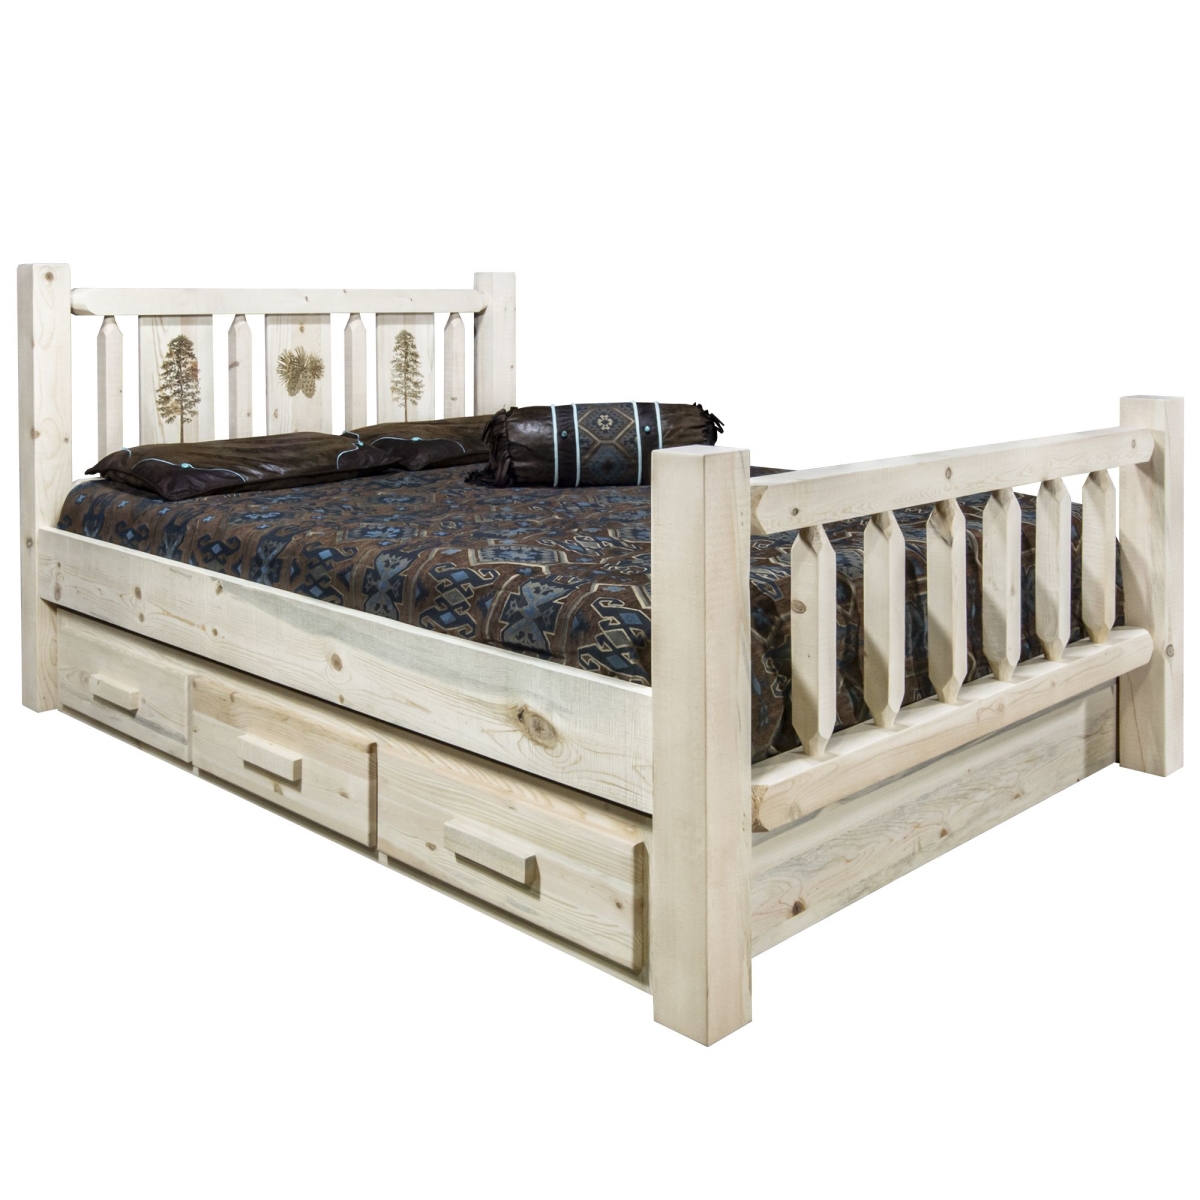 Homestead Collection Twin Size Storage Bed with Laser Engraved Pine Design, Clear Lacquer Finish -  D2D Technologies, D23072516